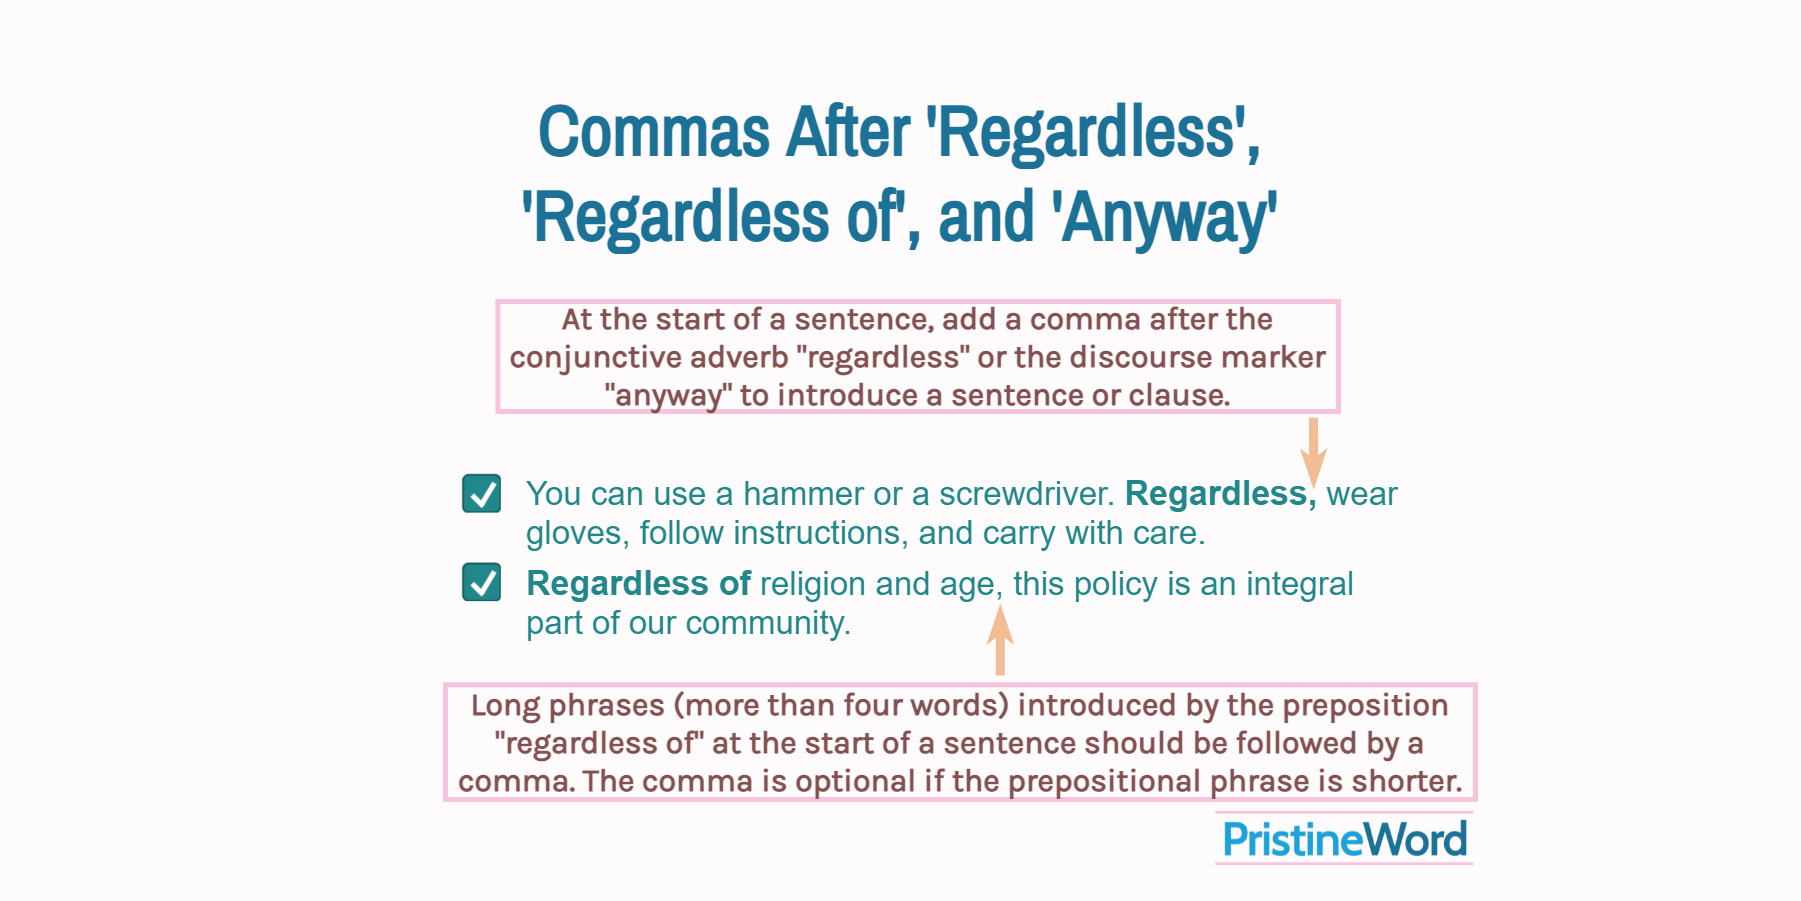 Commas After 'Regardless', 'Regardless of', and 'Anyway'